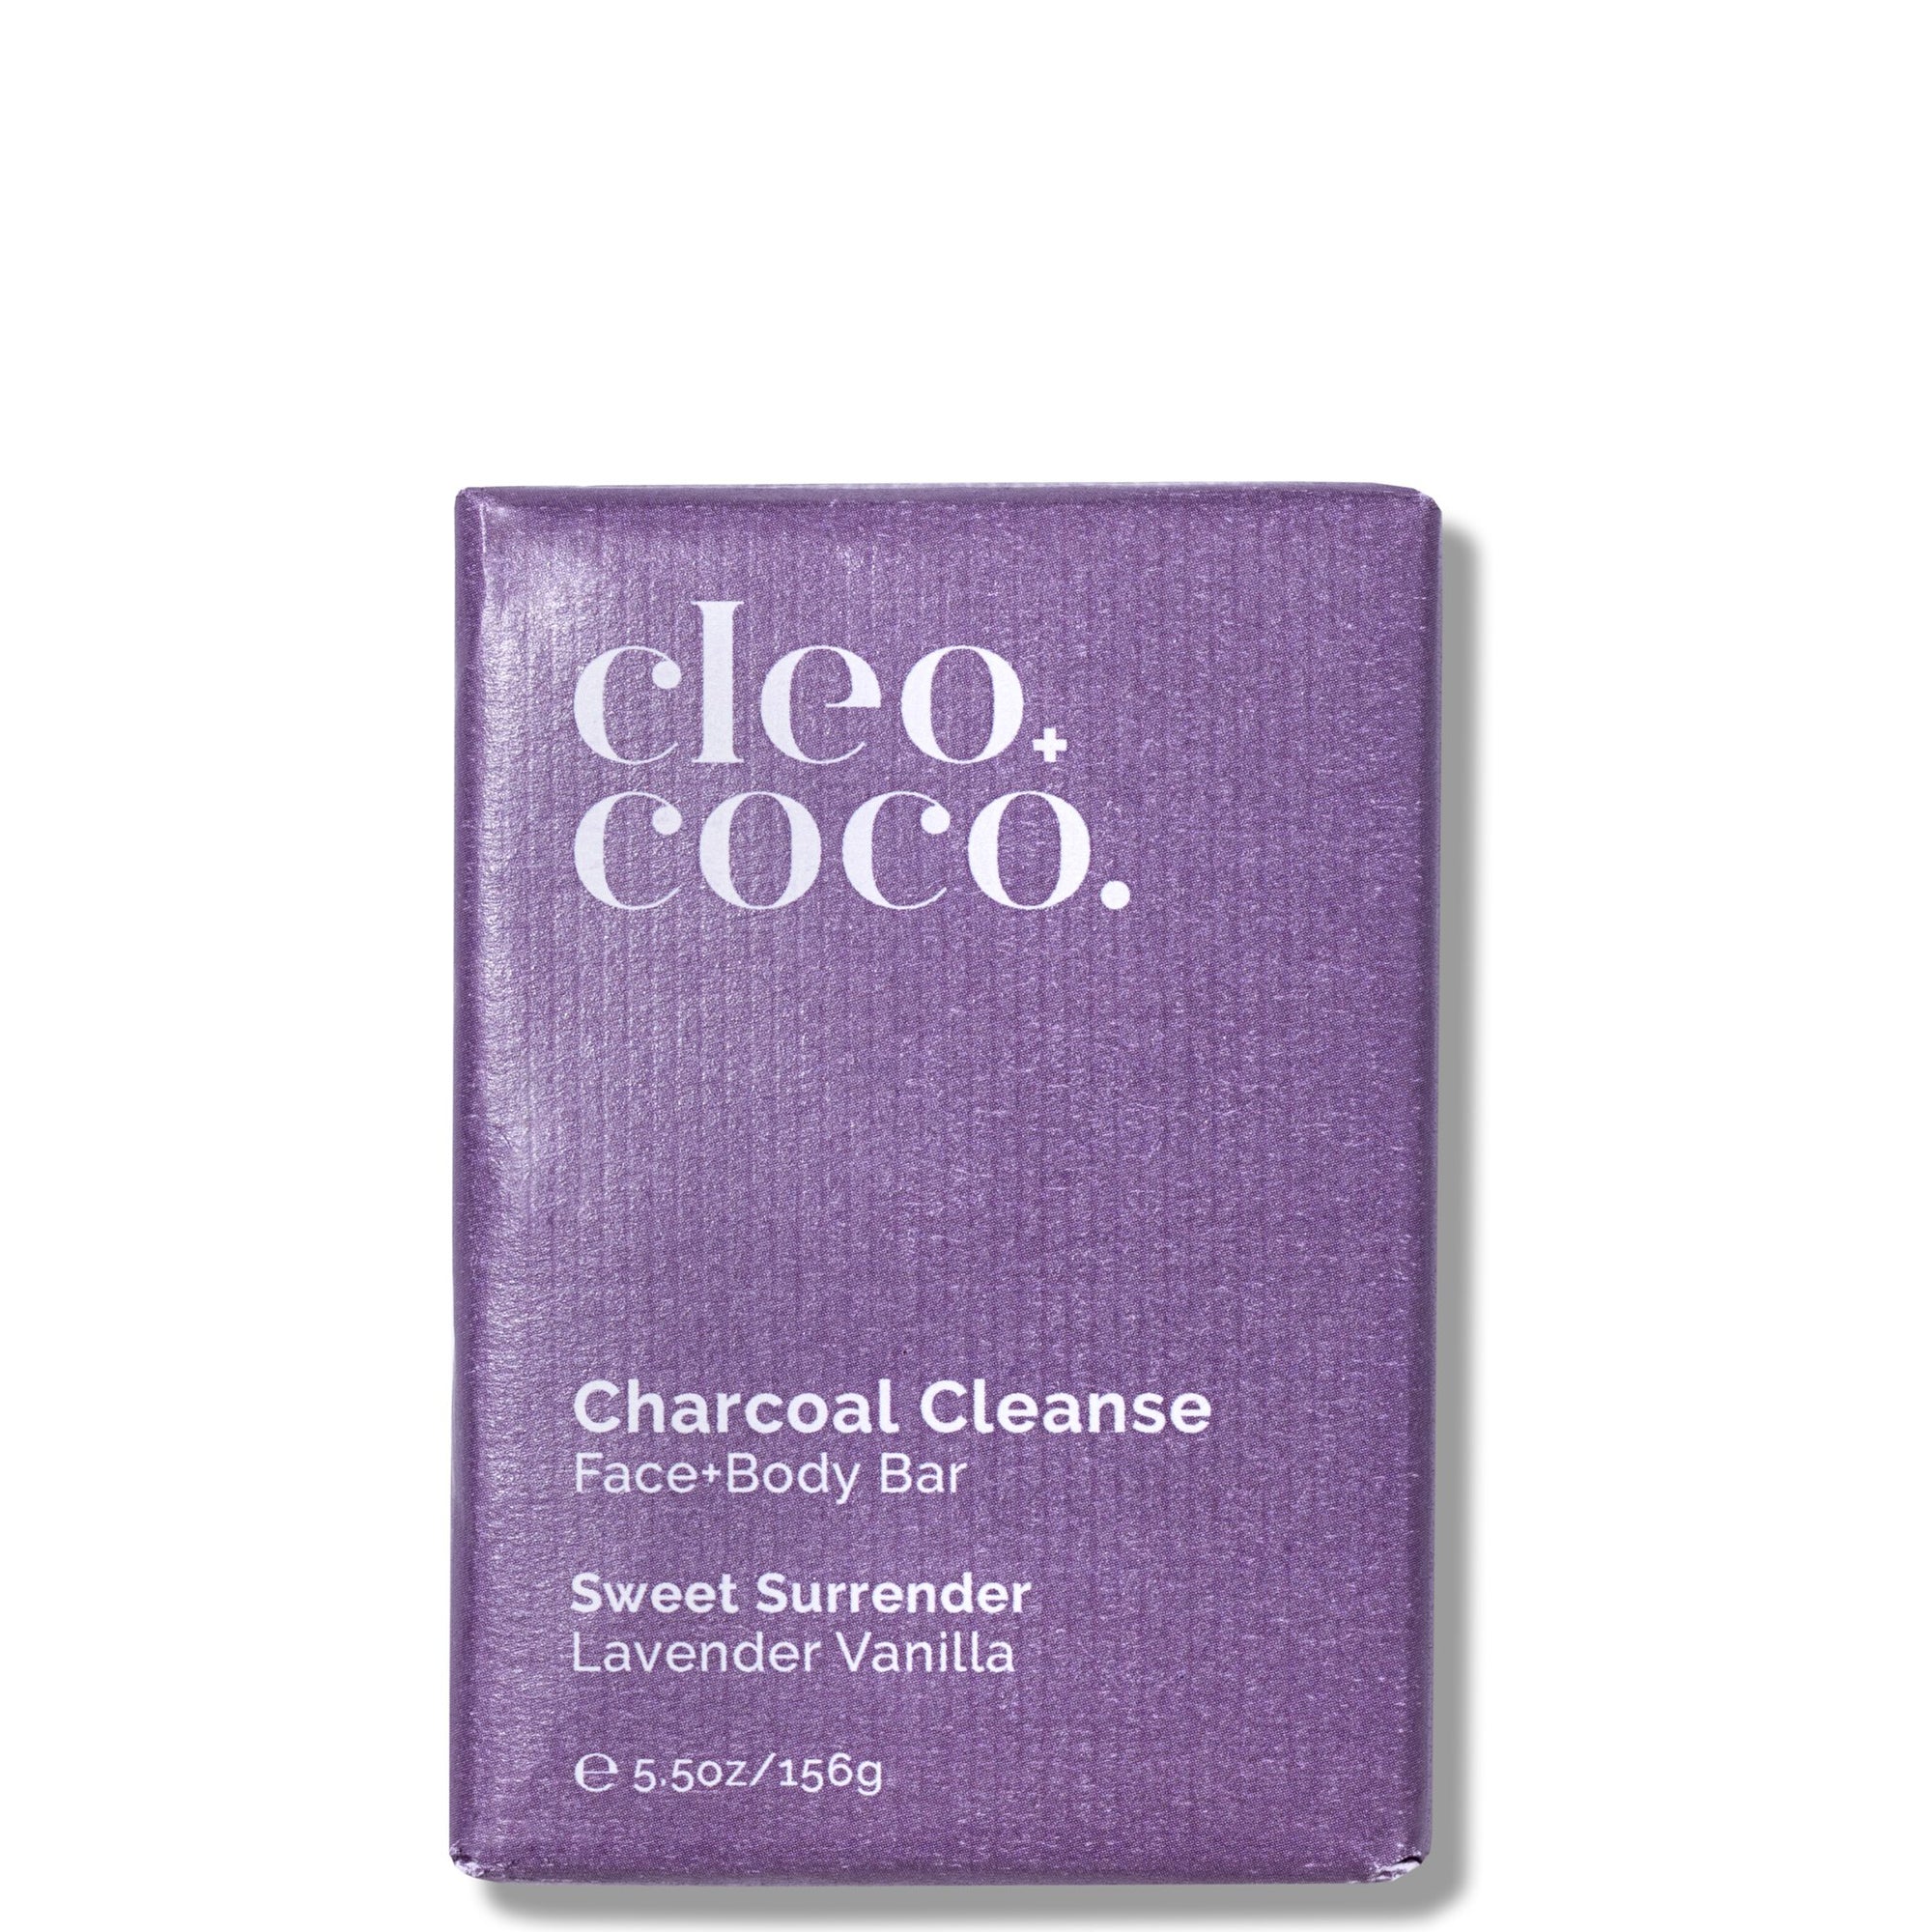 Charcoal Cleanse Face + Body Bar